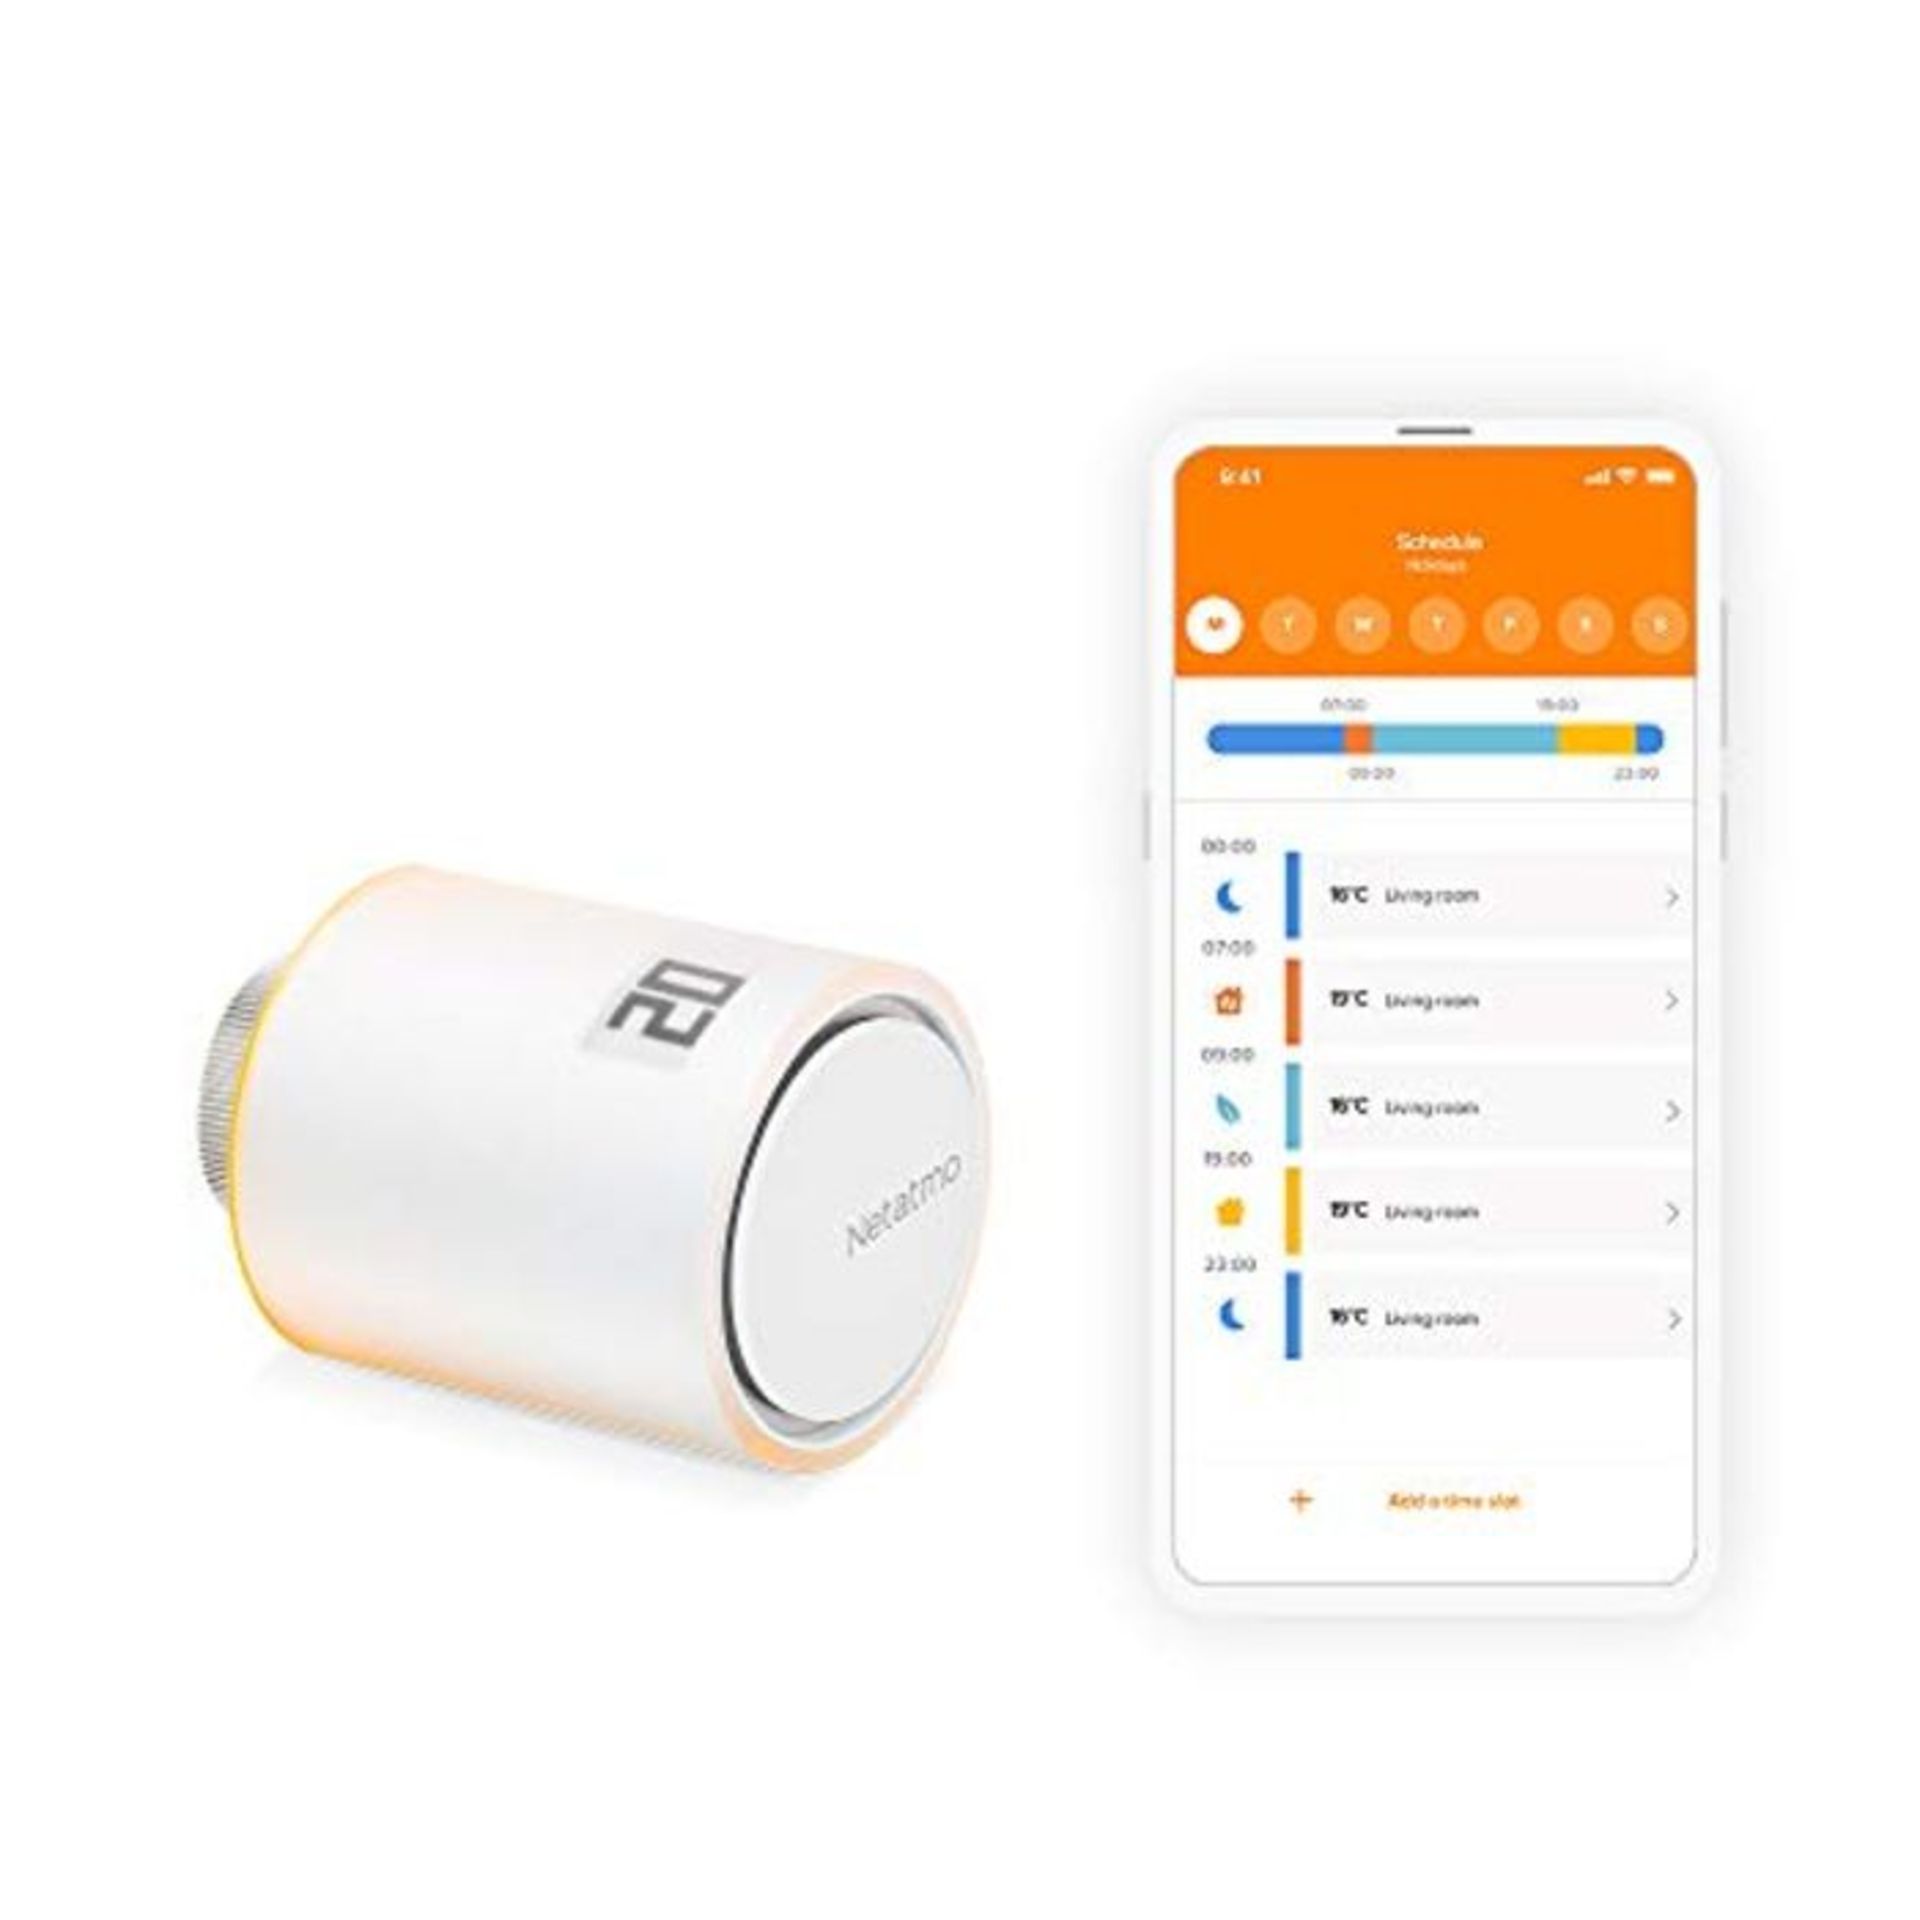 RRP £69.00 Netatmo Additional Smart Radiator Valve, Add-on for Smart Thermostat and for collectiv